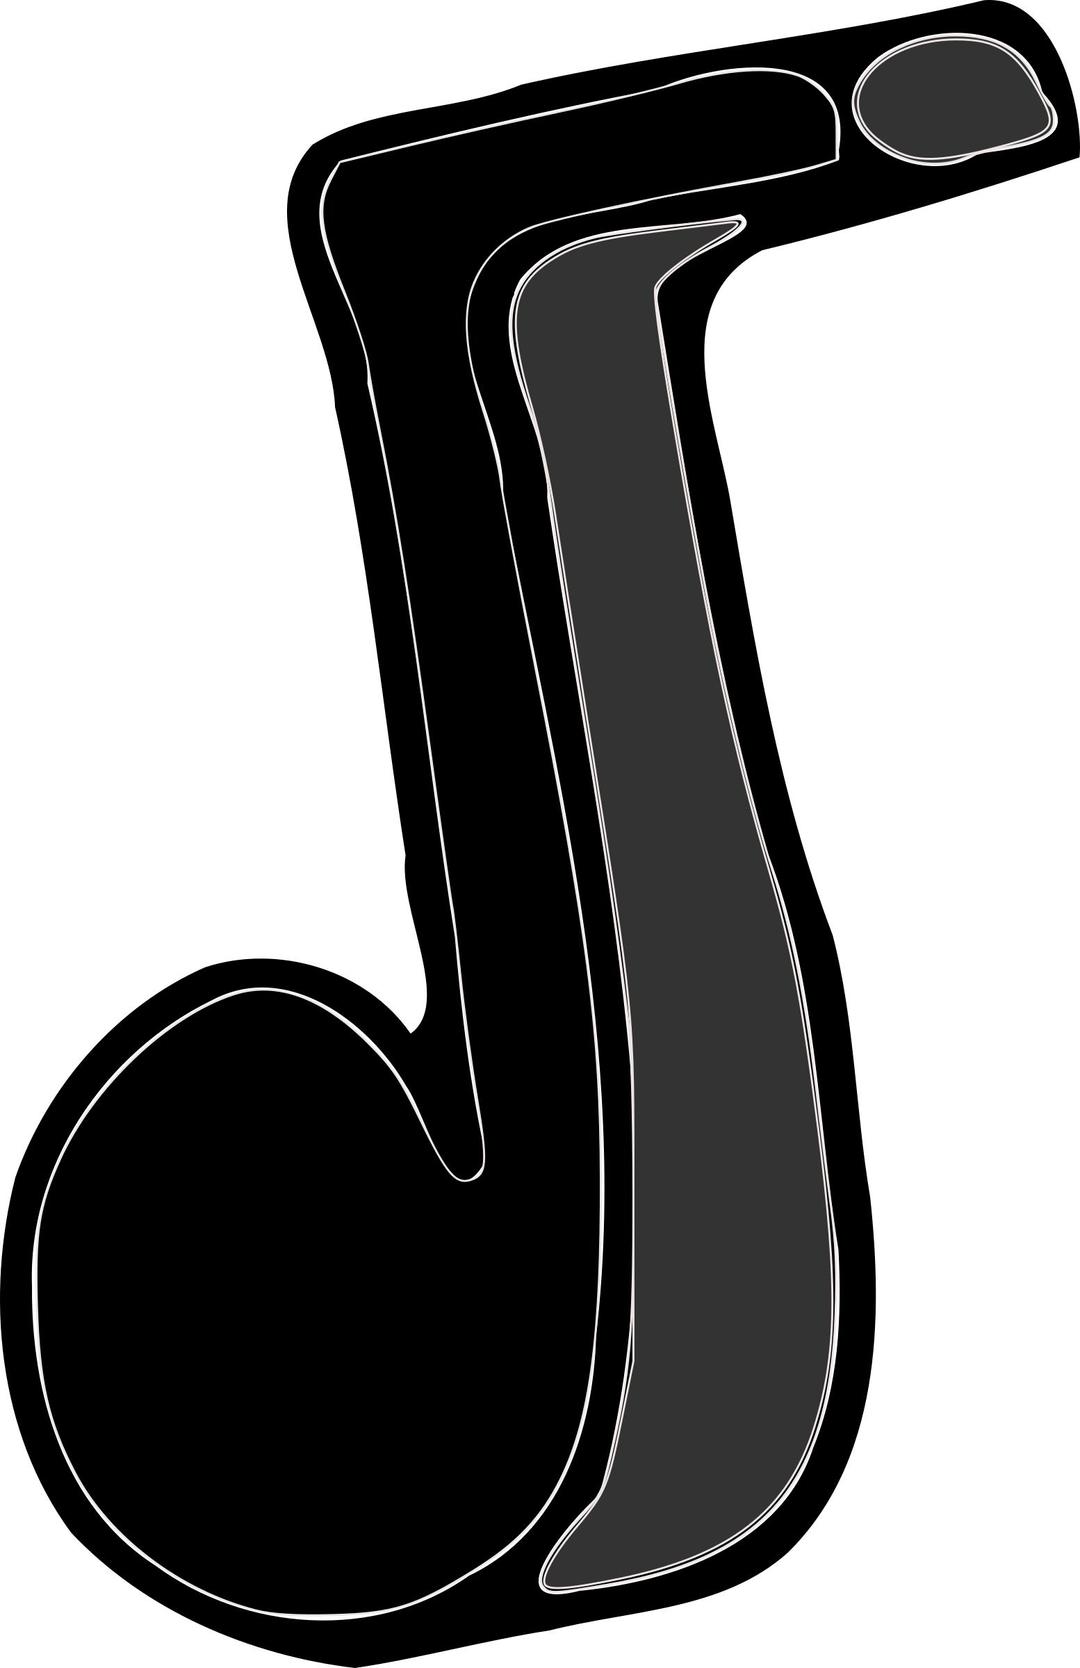 Single Music Note png transparent